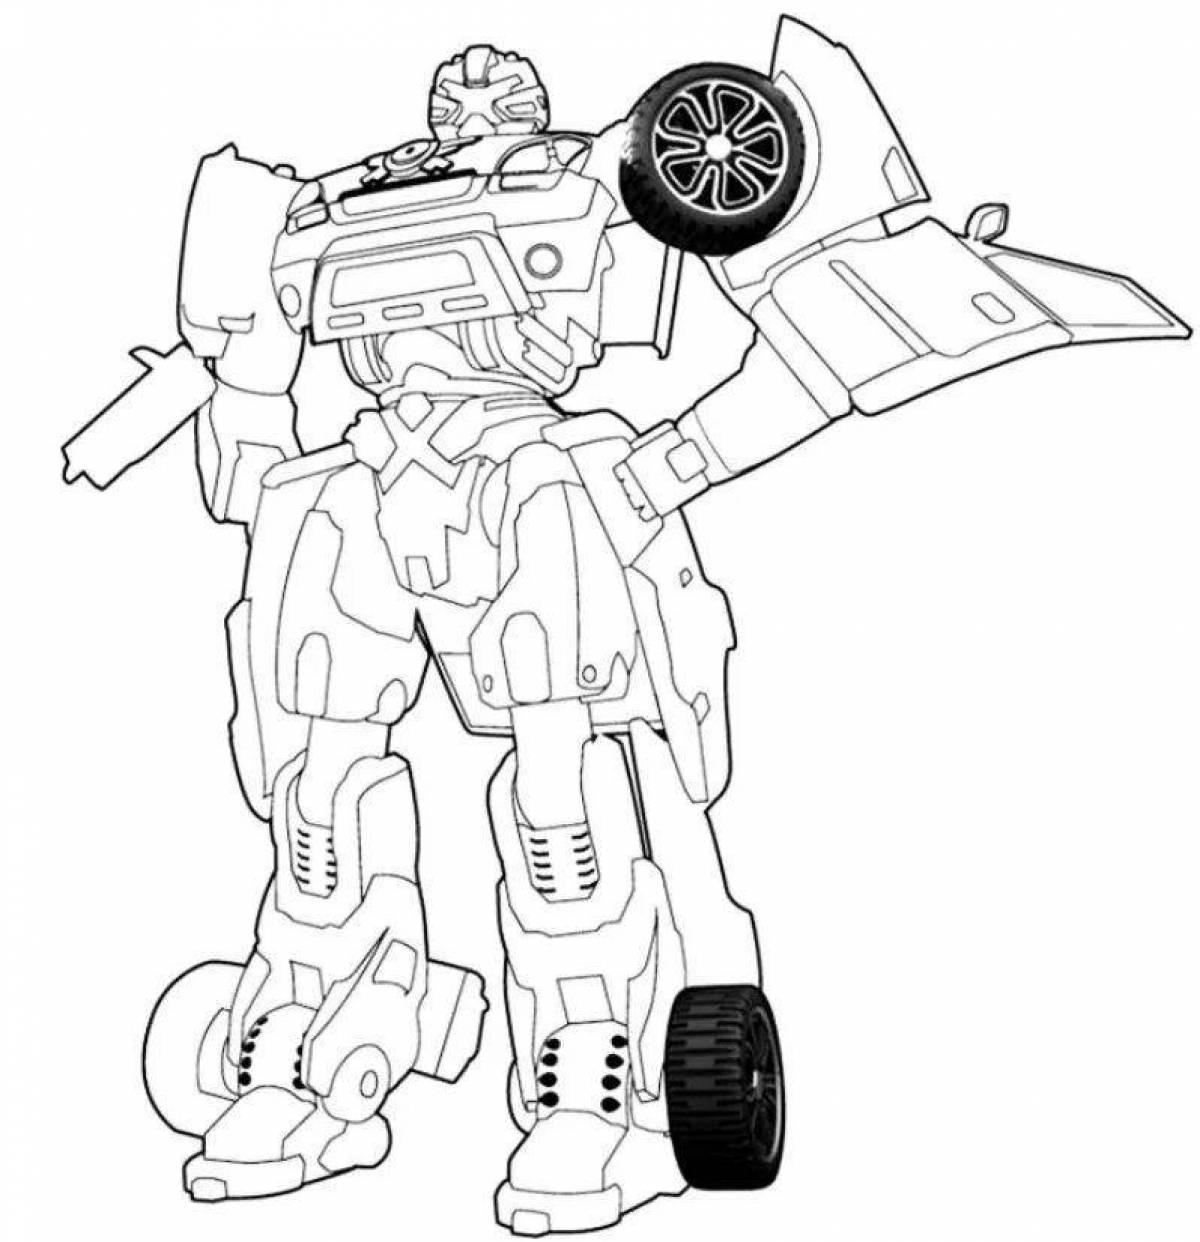 Interesting tobot x coloring page